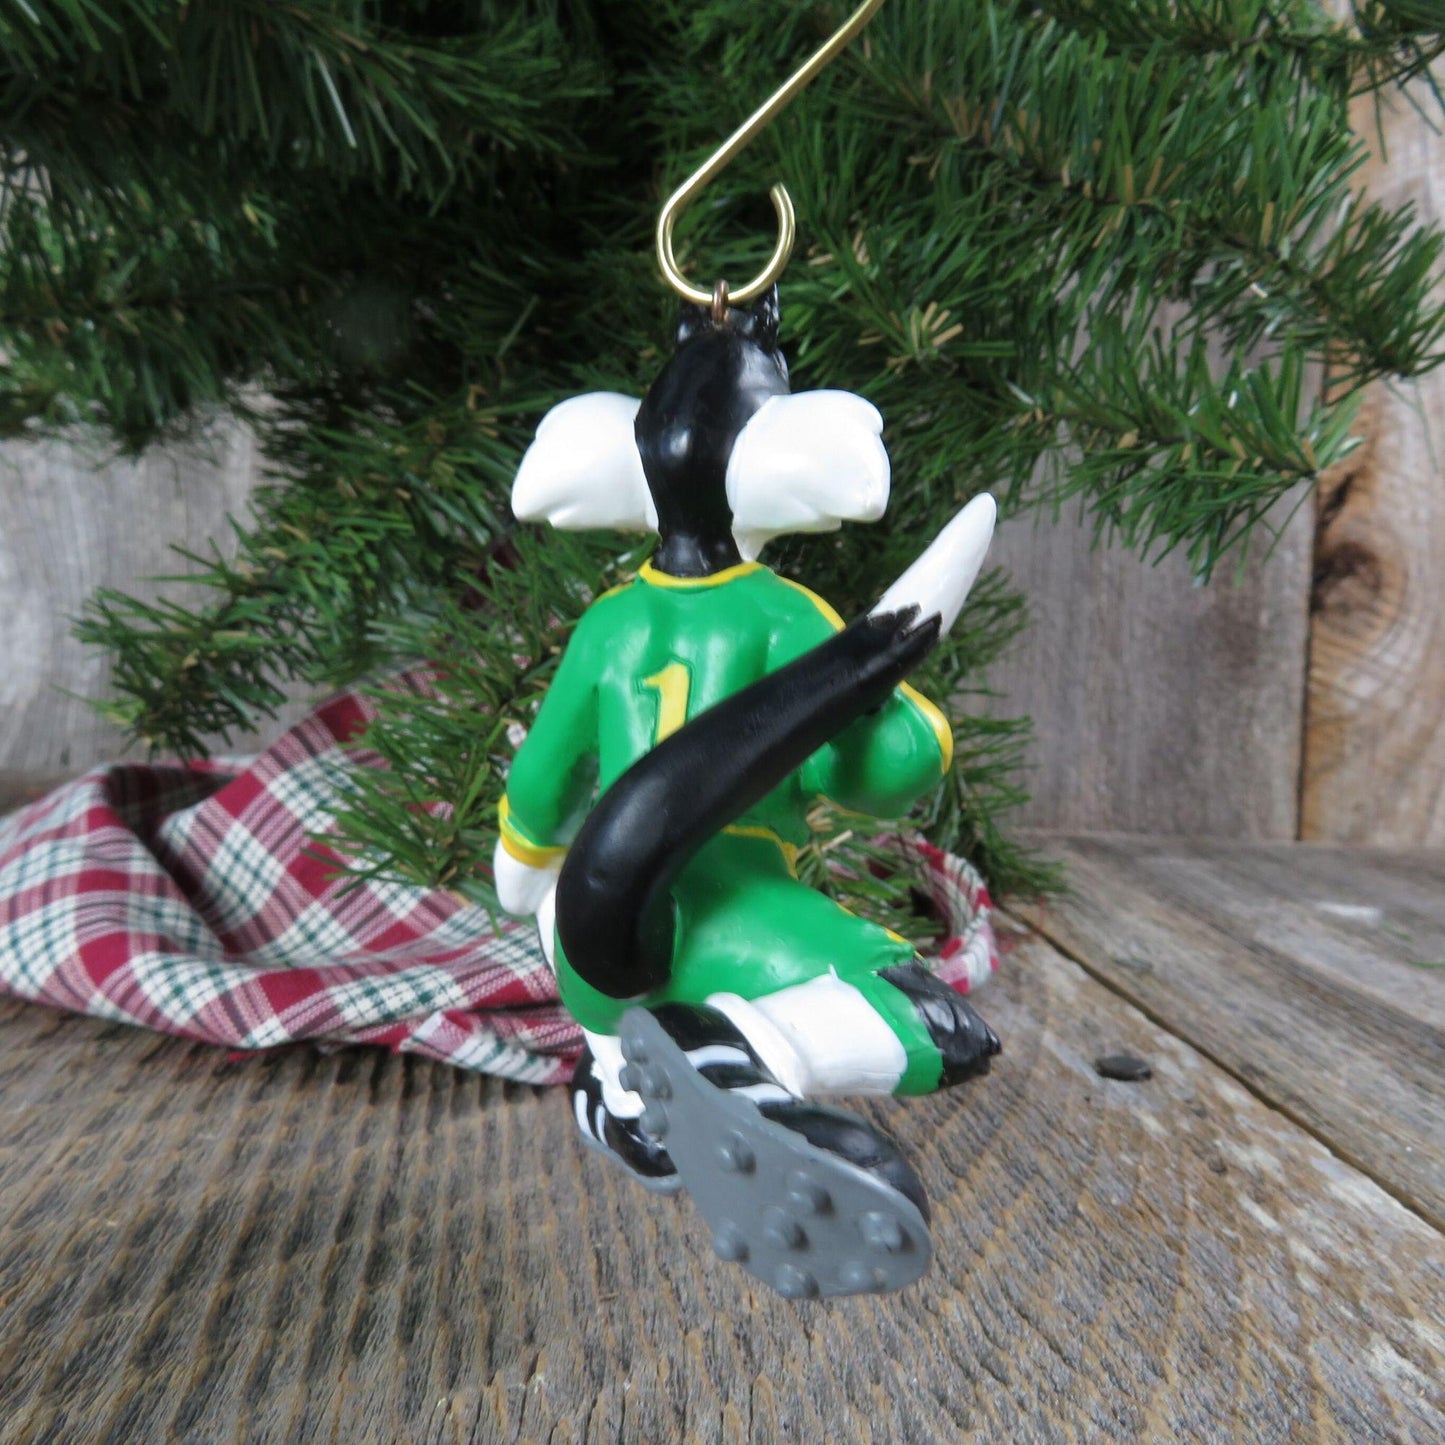 Vintage Sylvester Soccer Ornament Christmas Looney Tunes Warner Brothers Green Yellow 1996